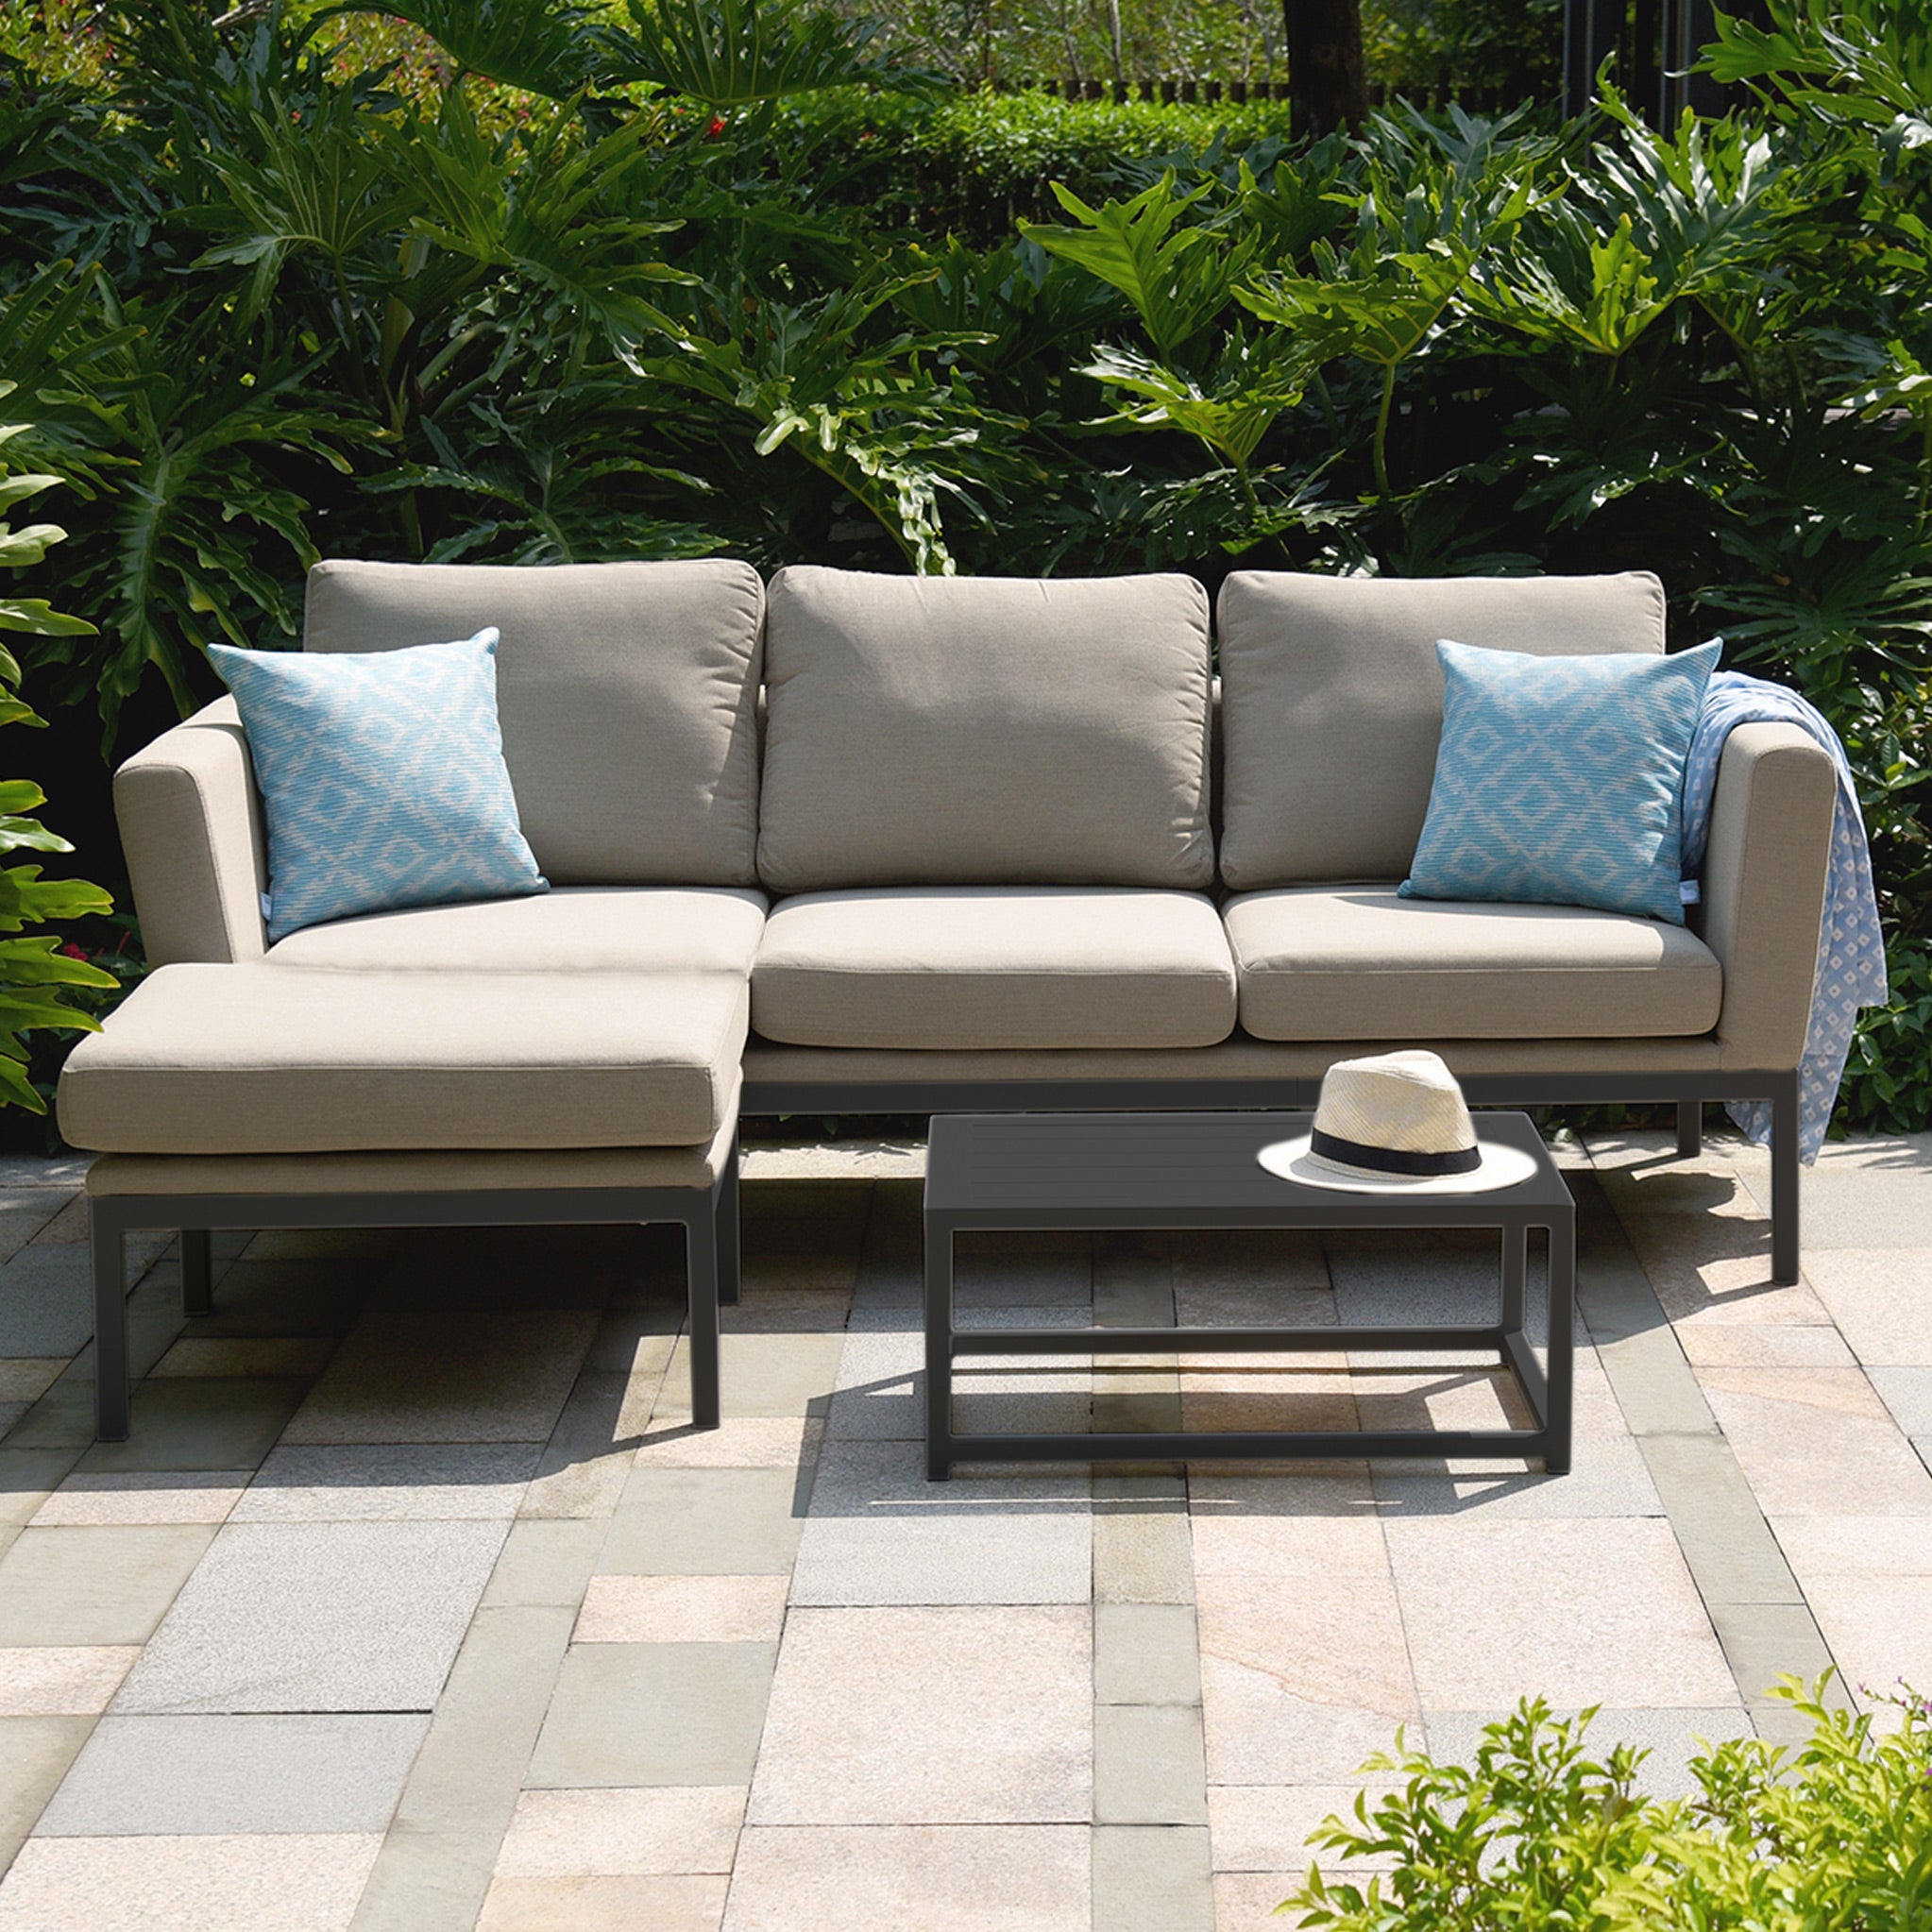 Pulse Outdoor All Weather Chaise Sofa Set With Winter Cover Roseland